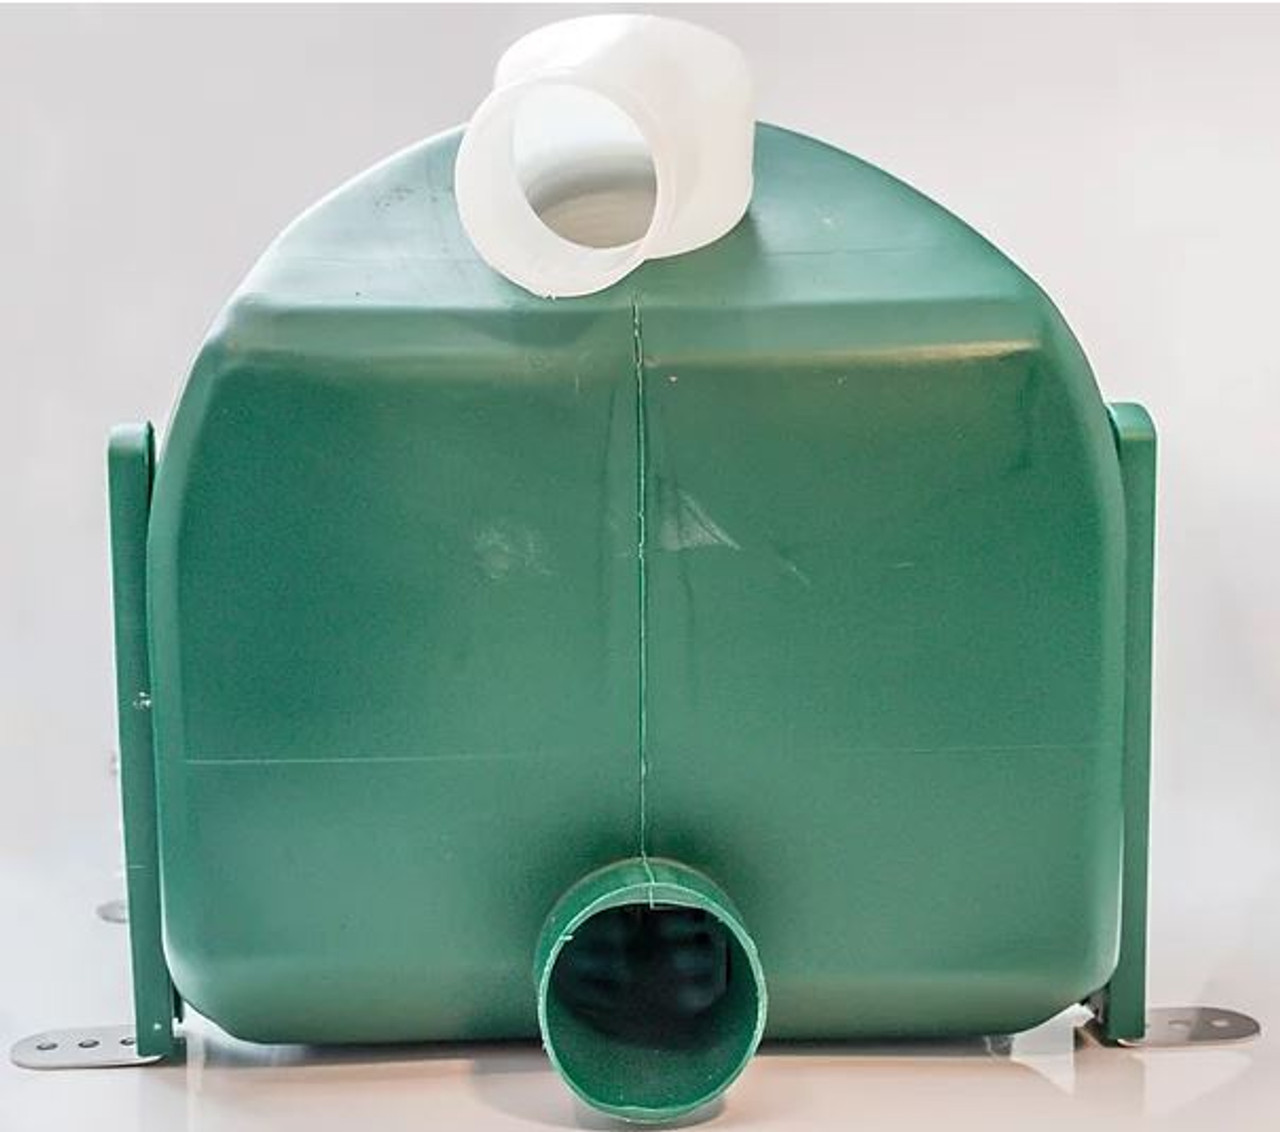 Rhino Wet Waste Interceptor - filter out solids from commercial sink water, 90 filters included